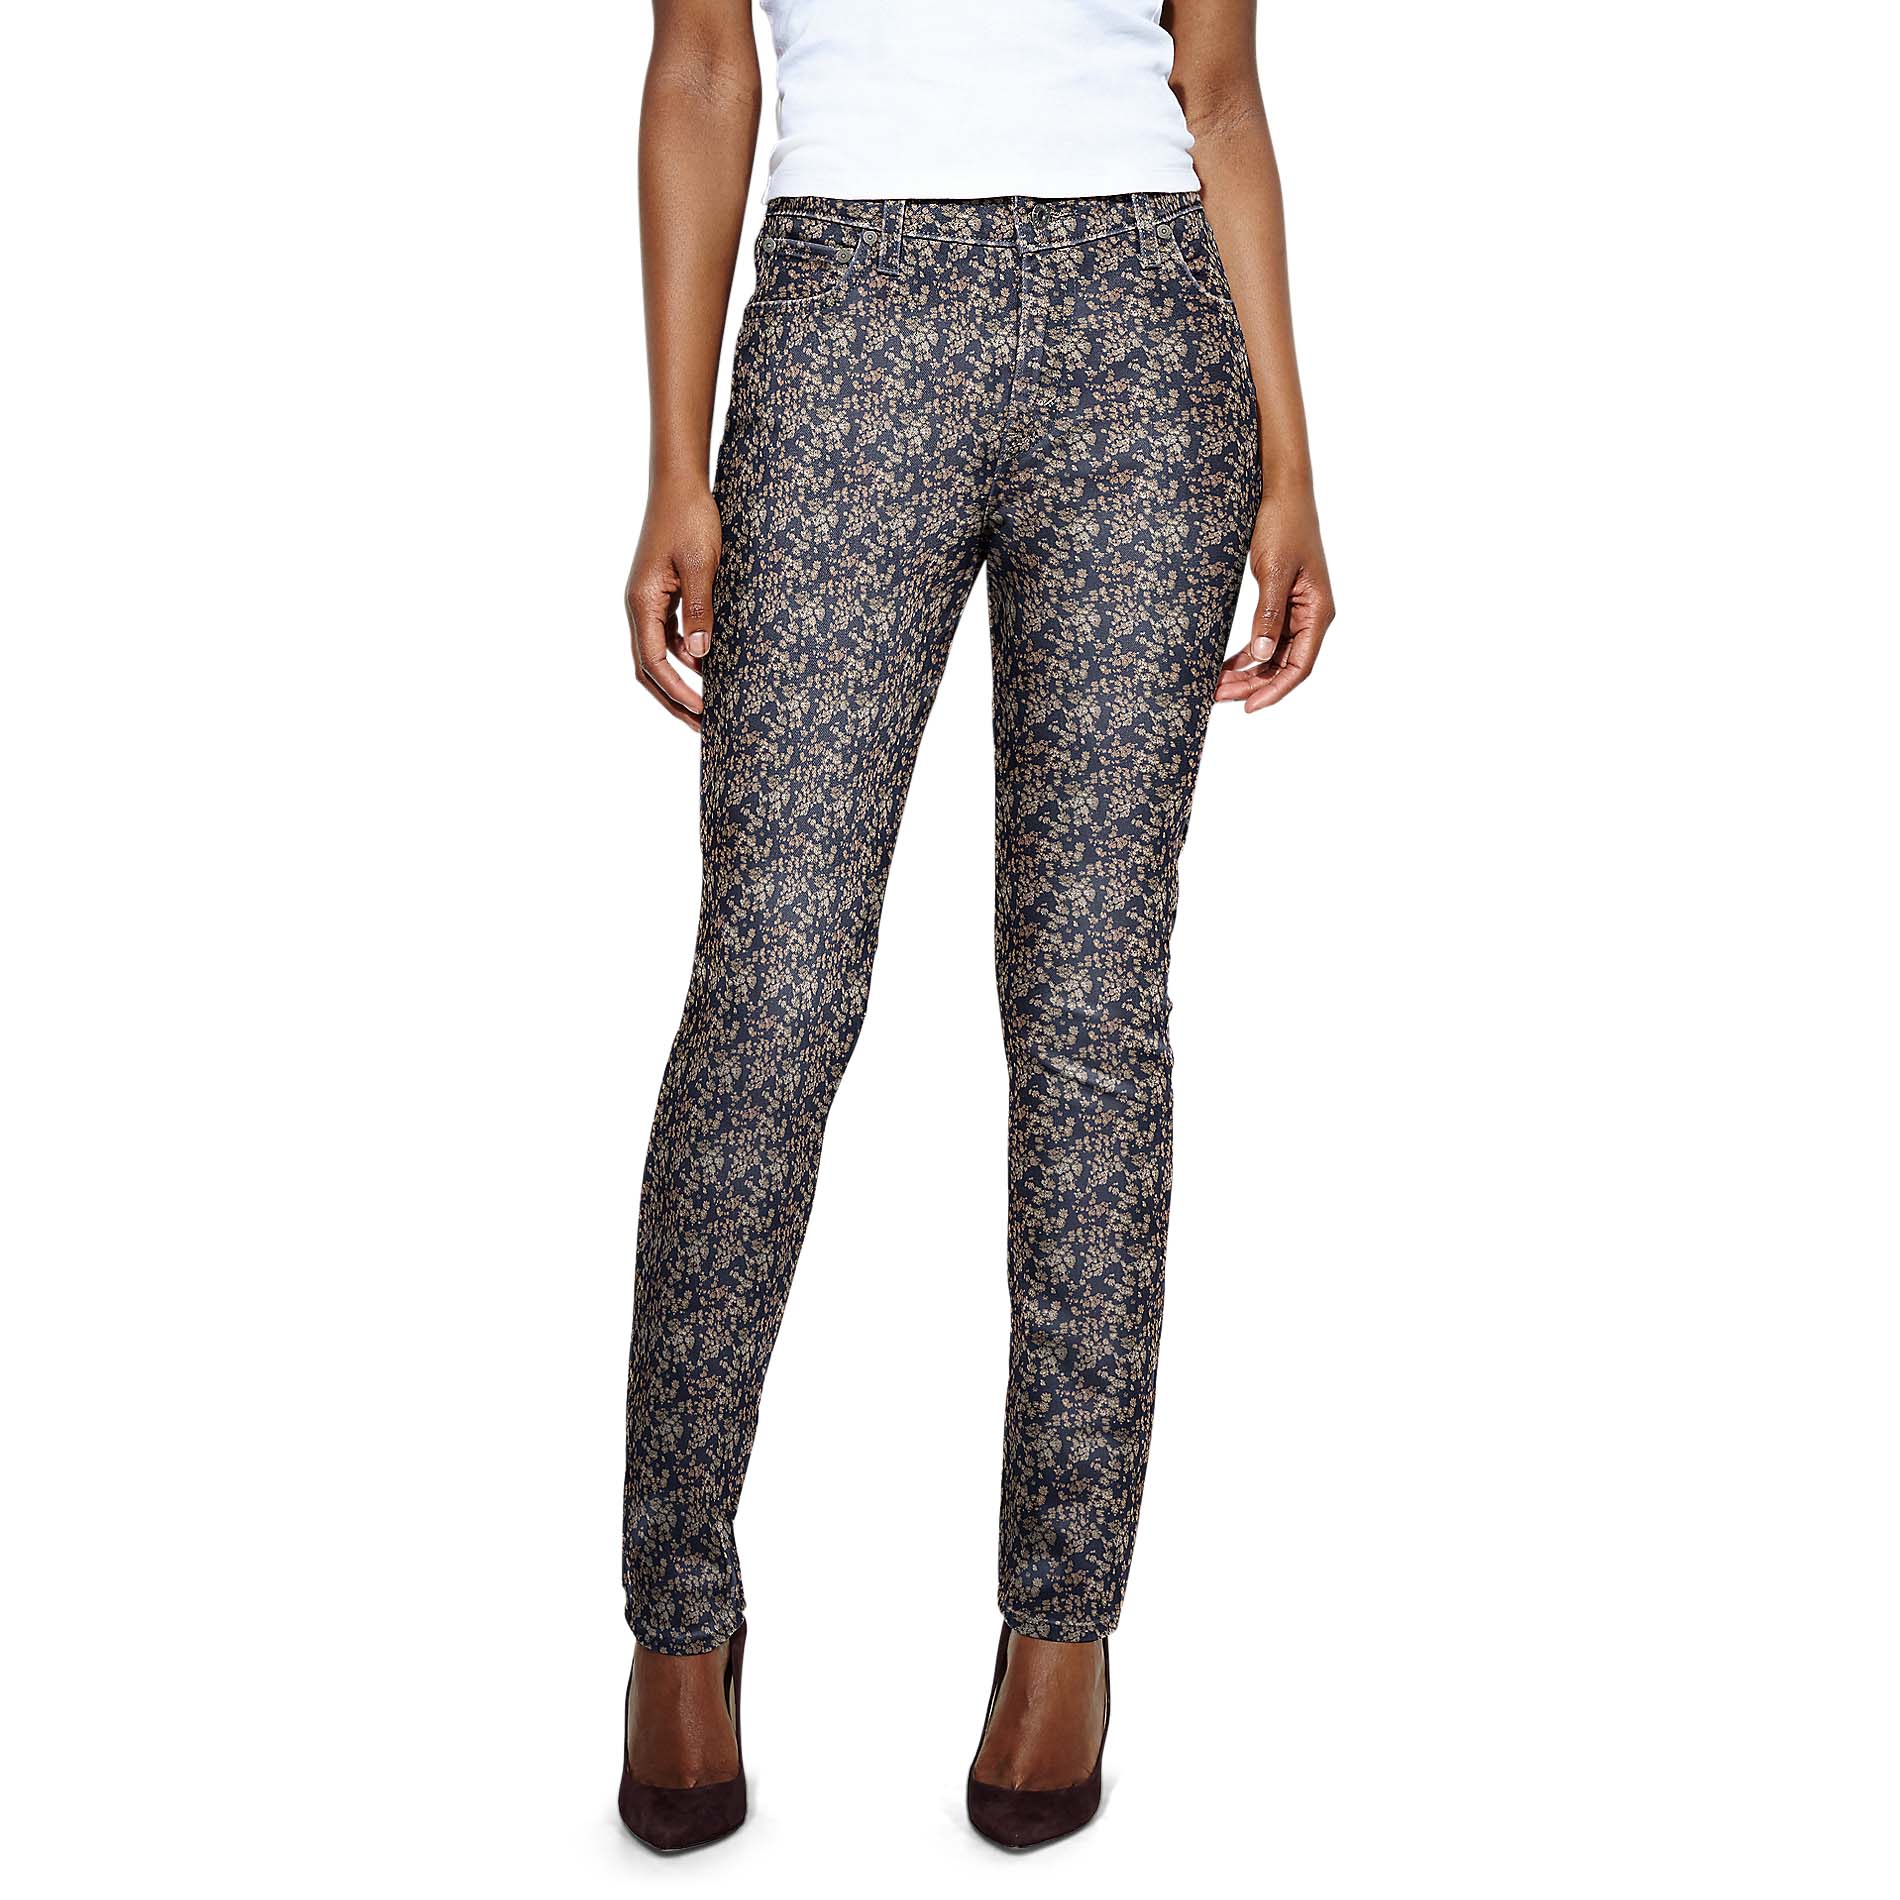 Levi's Women's Mid-Rise Skinny Jeans - Floral